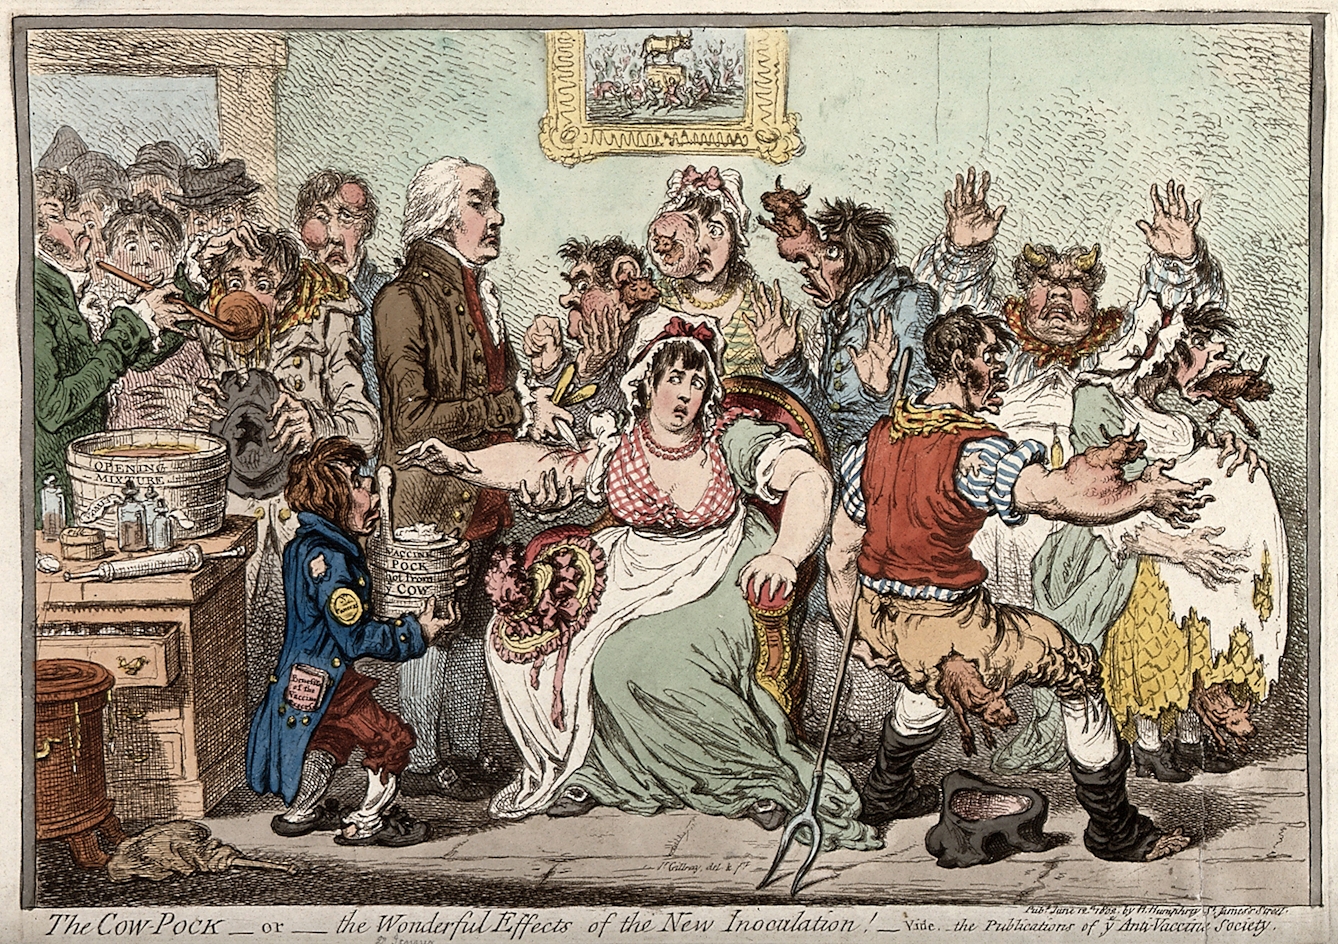 Edward Jenner vaccinating patients, who develop features of cows, James Gillray, 1802.